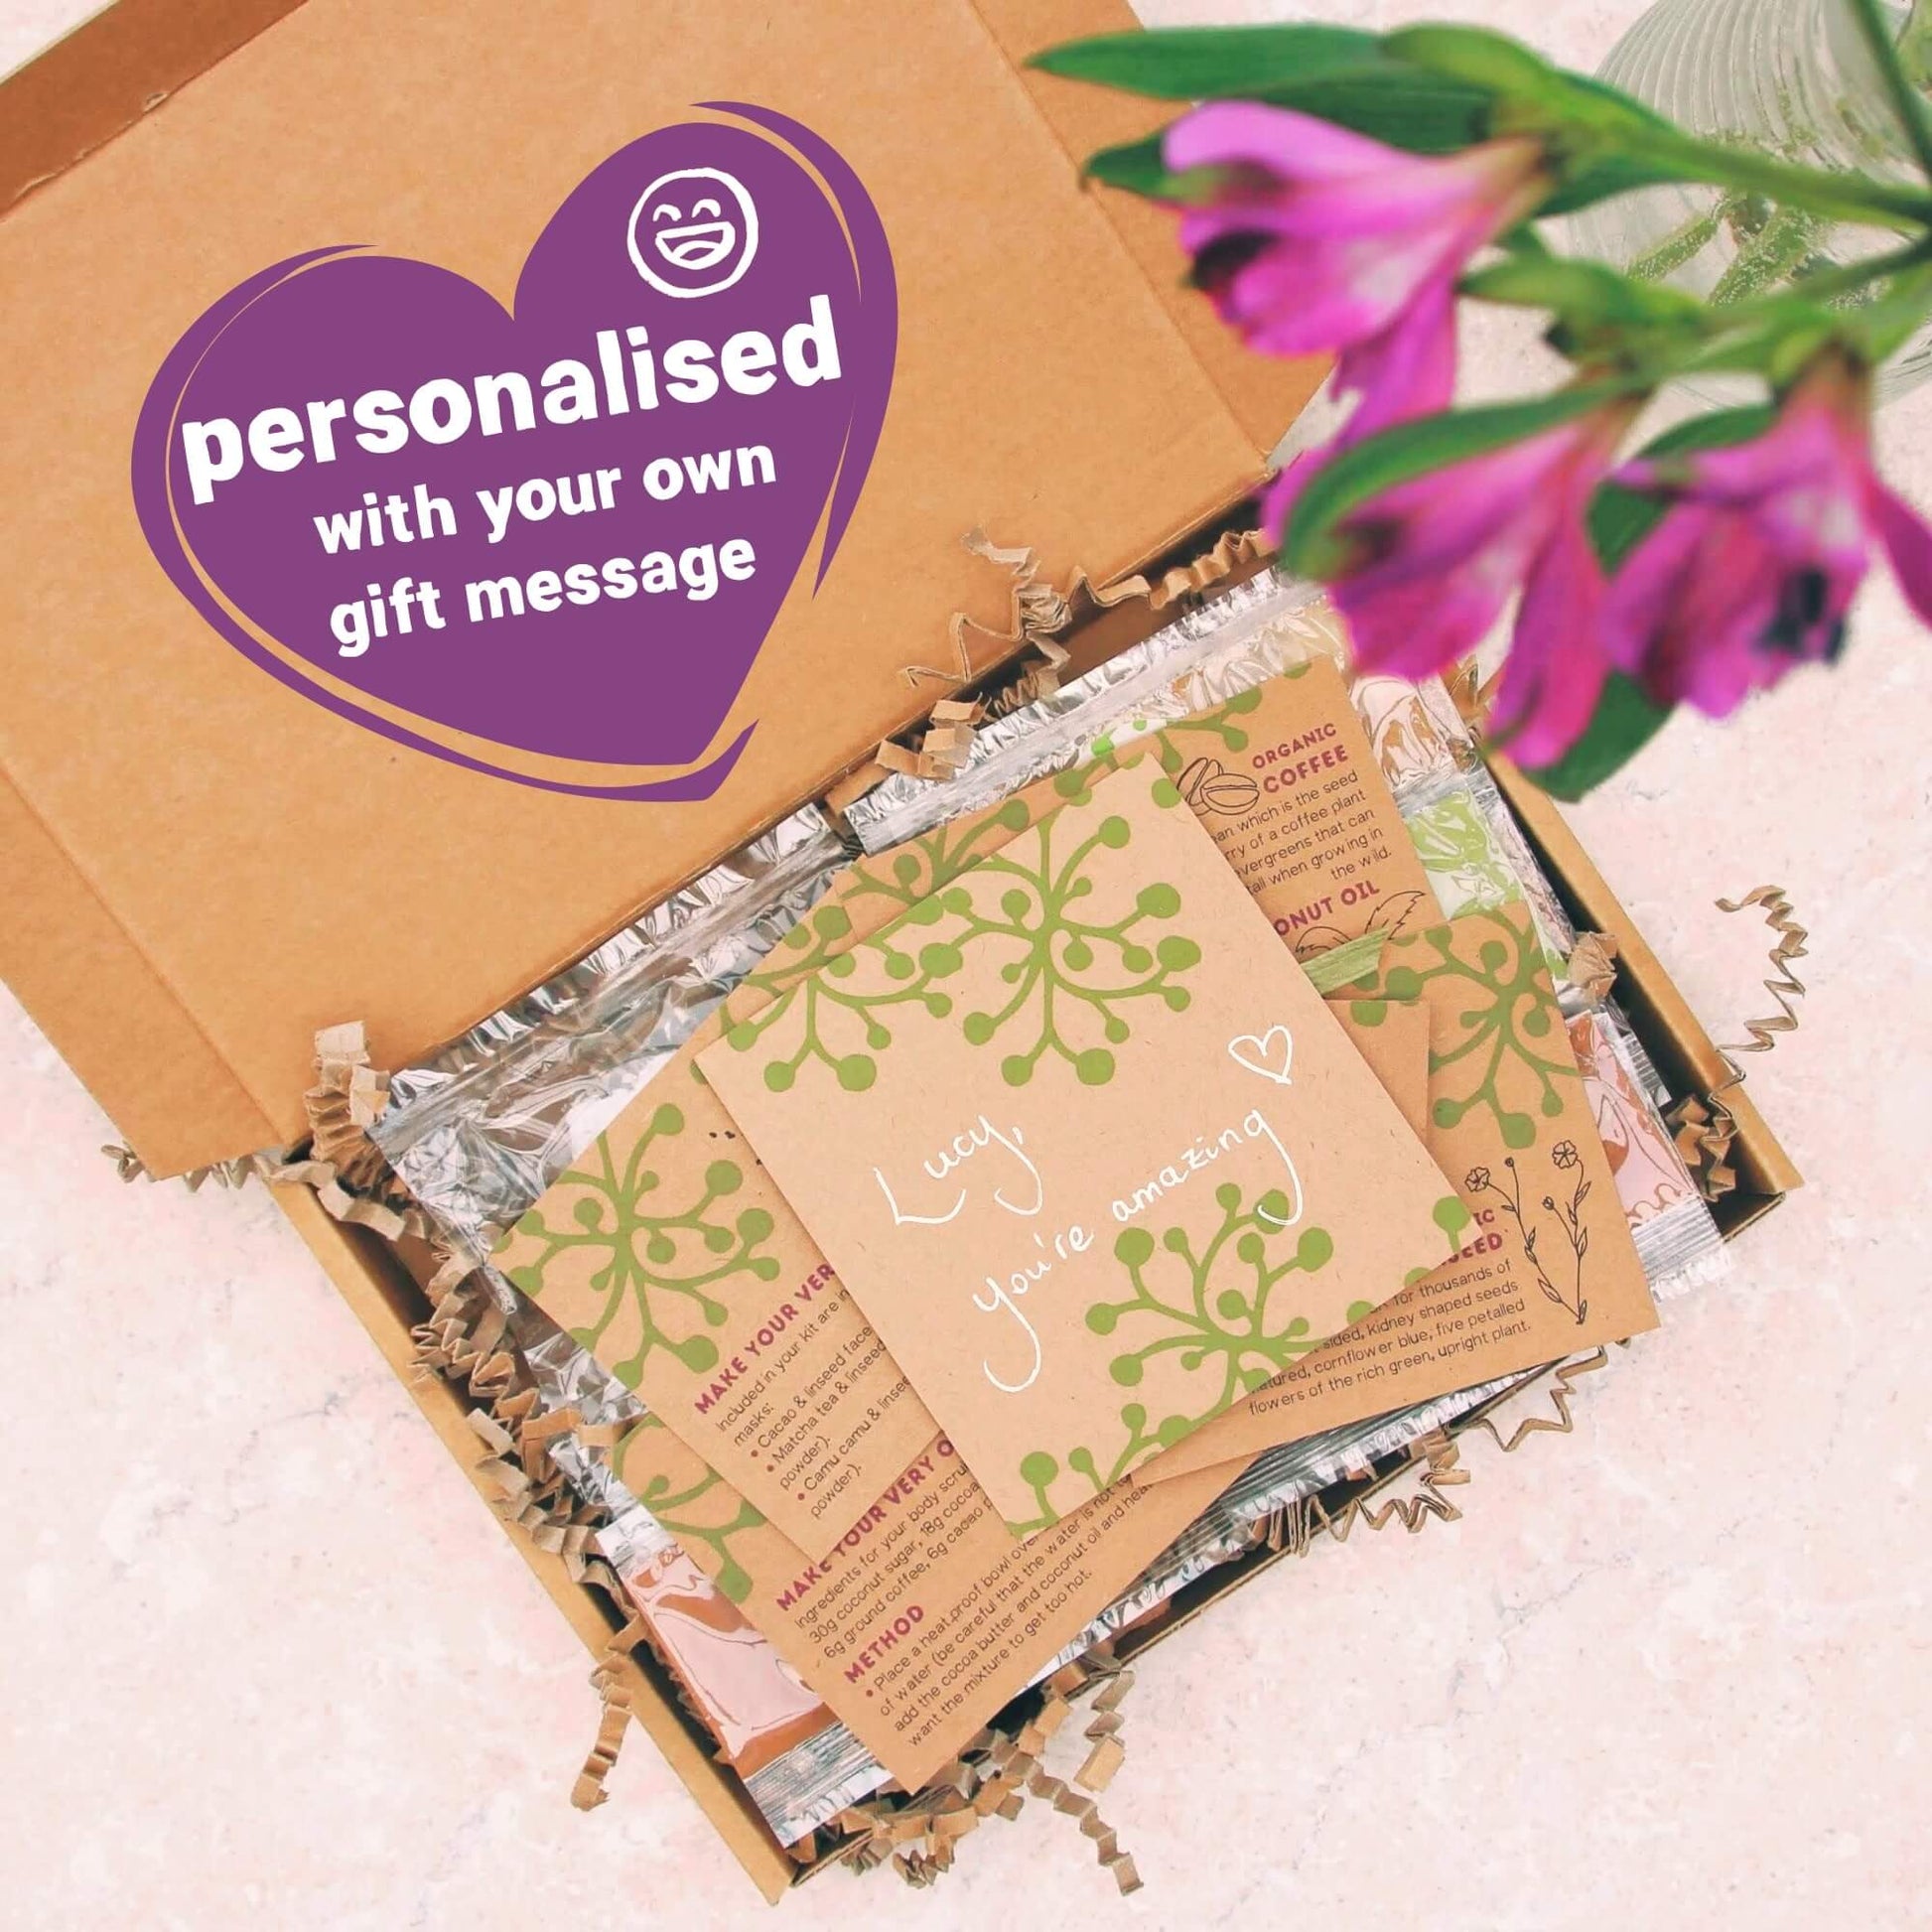 personalised gift message inside sister gift box